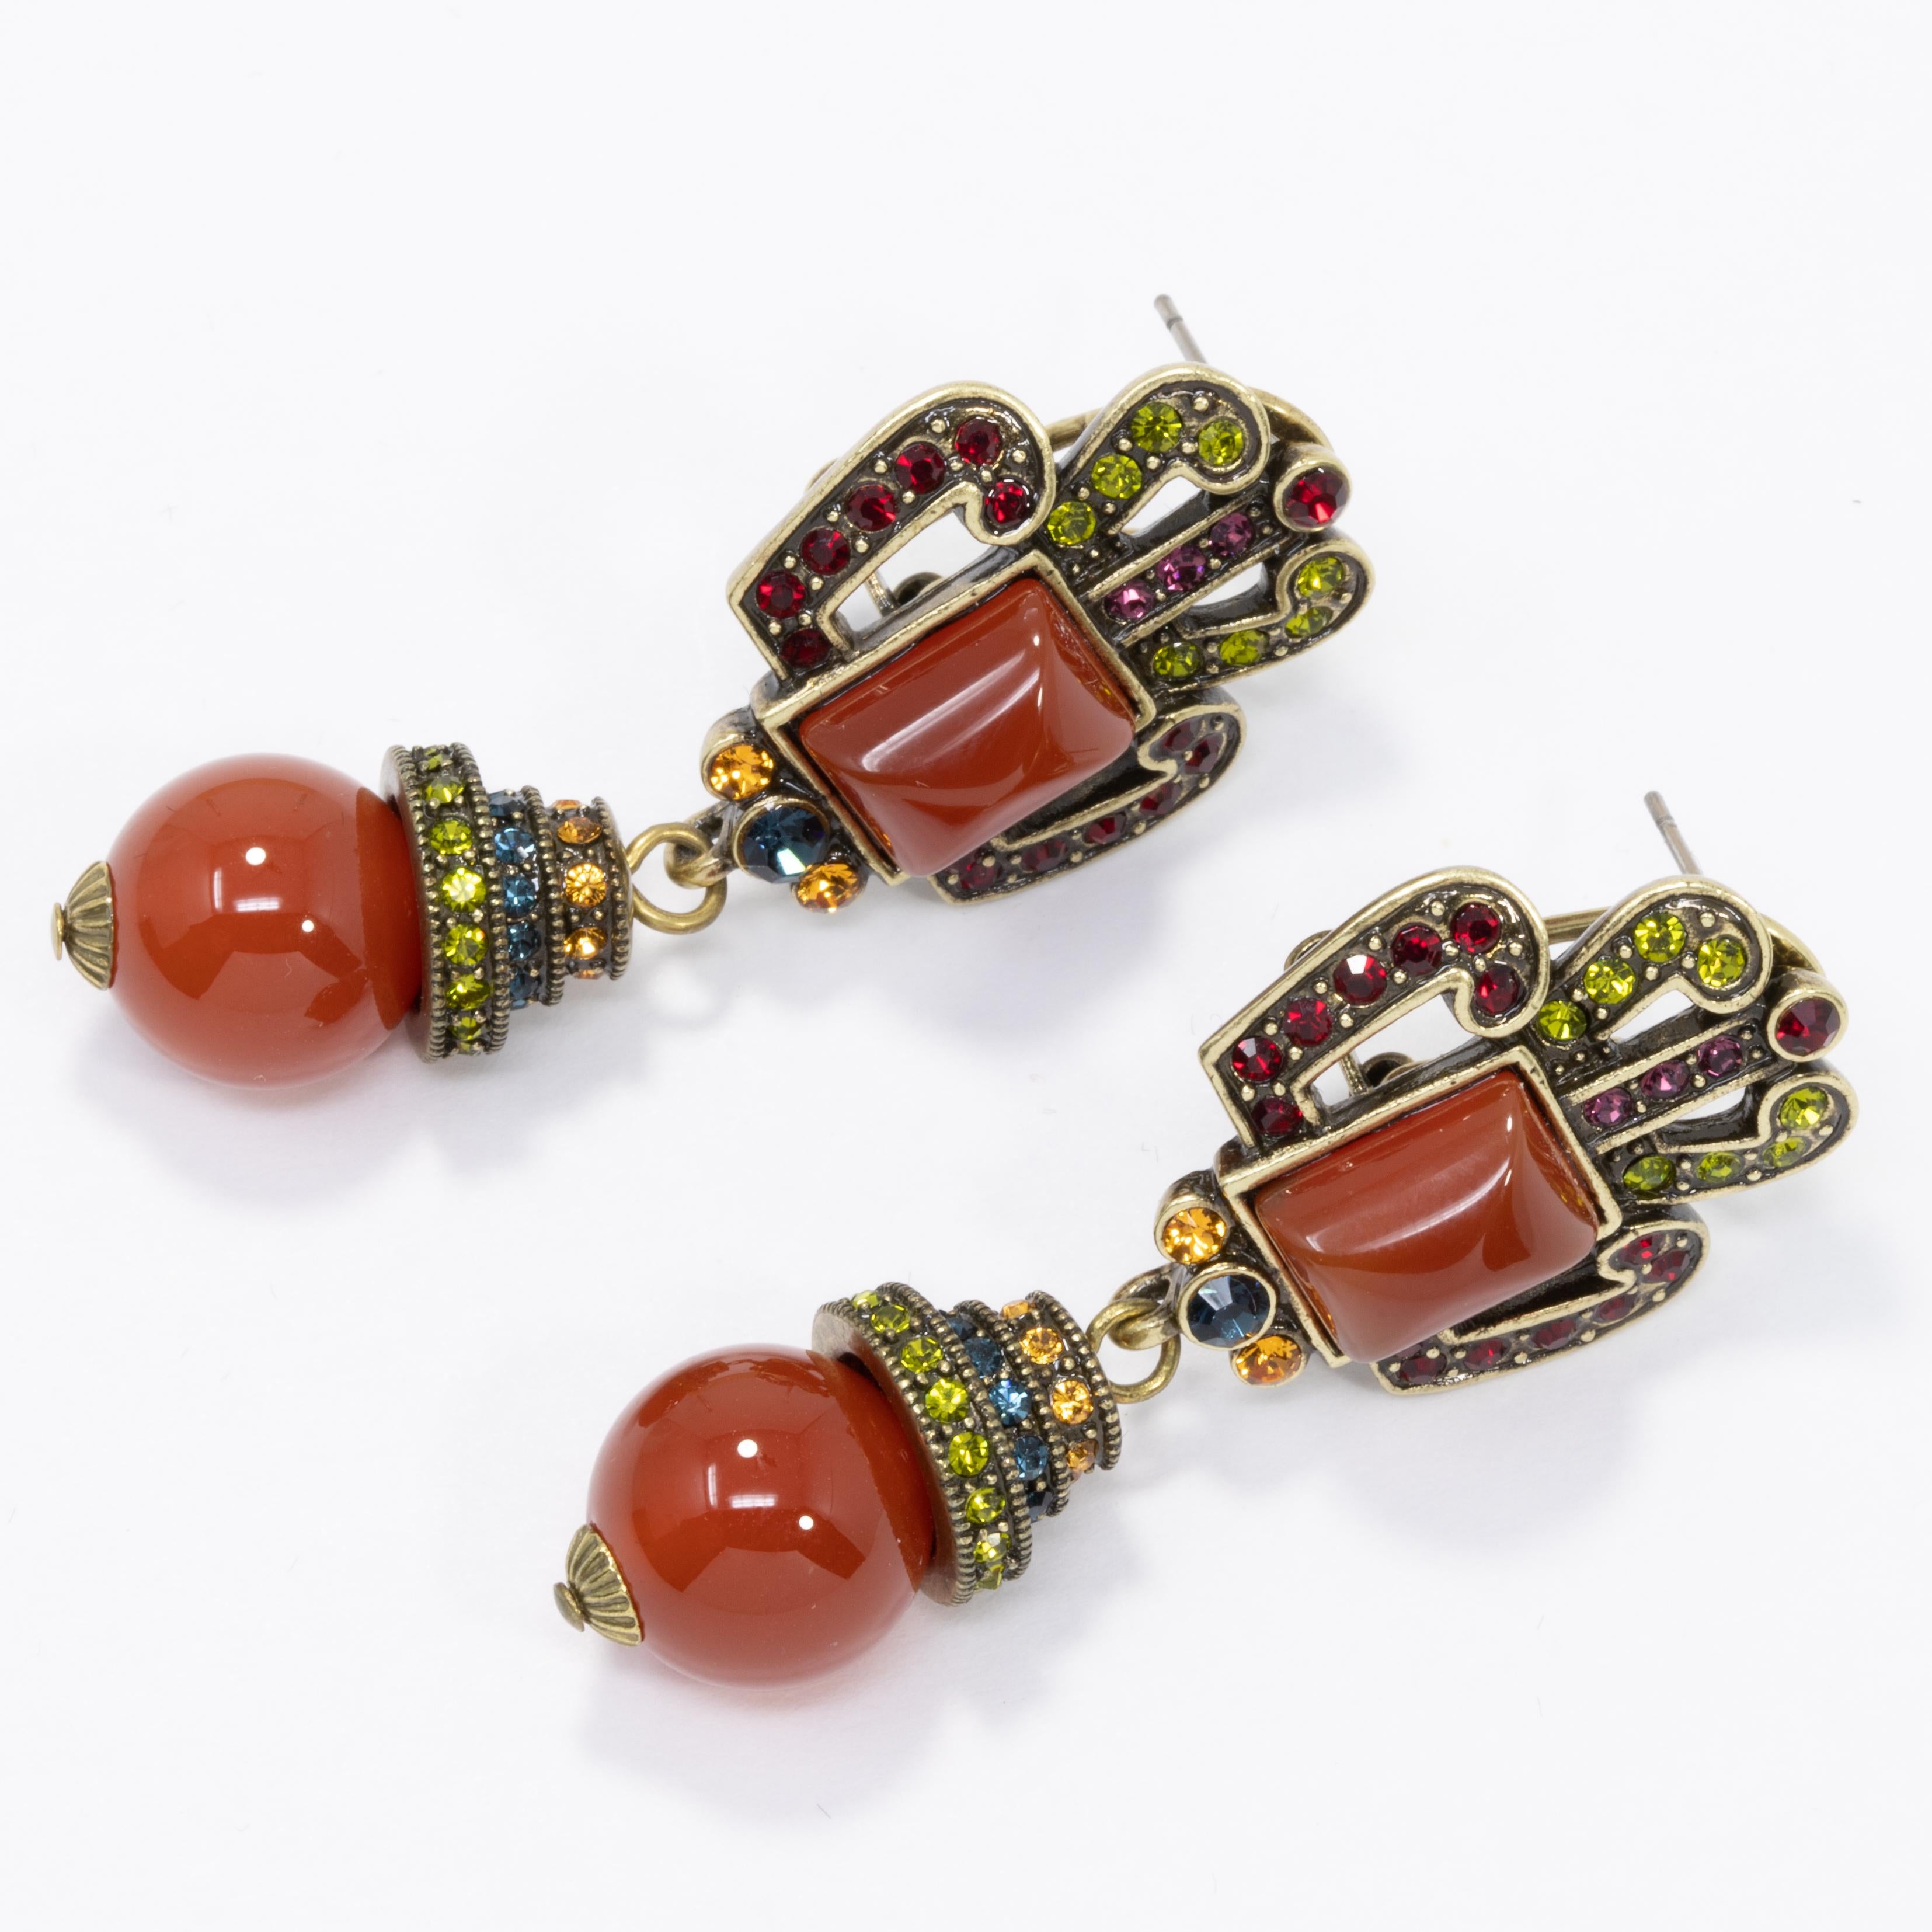 Illuminate the room with your glamour! A pair of lantern clip on earrings decorated with sparkling crystal details, and amber cabochons.

Hallmarks: Heidi Daus, CN
